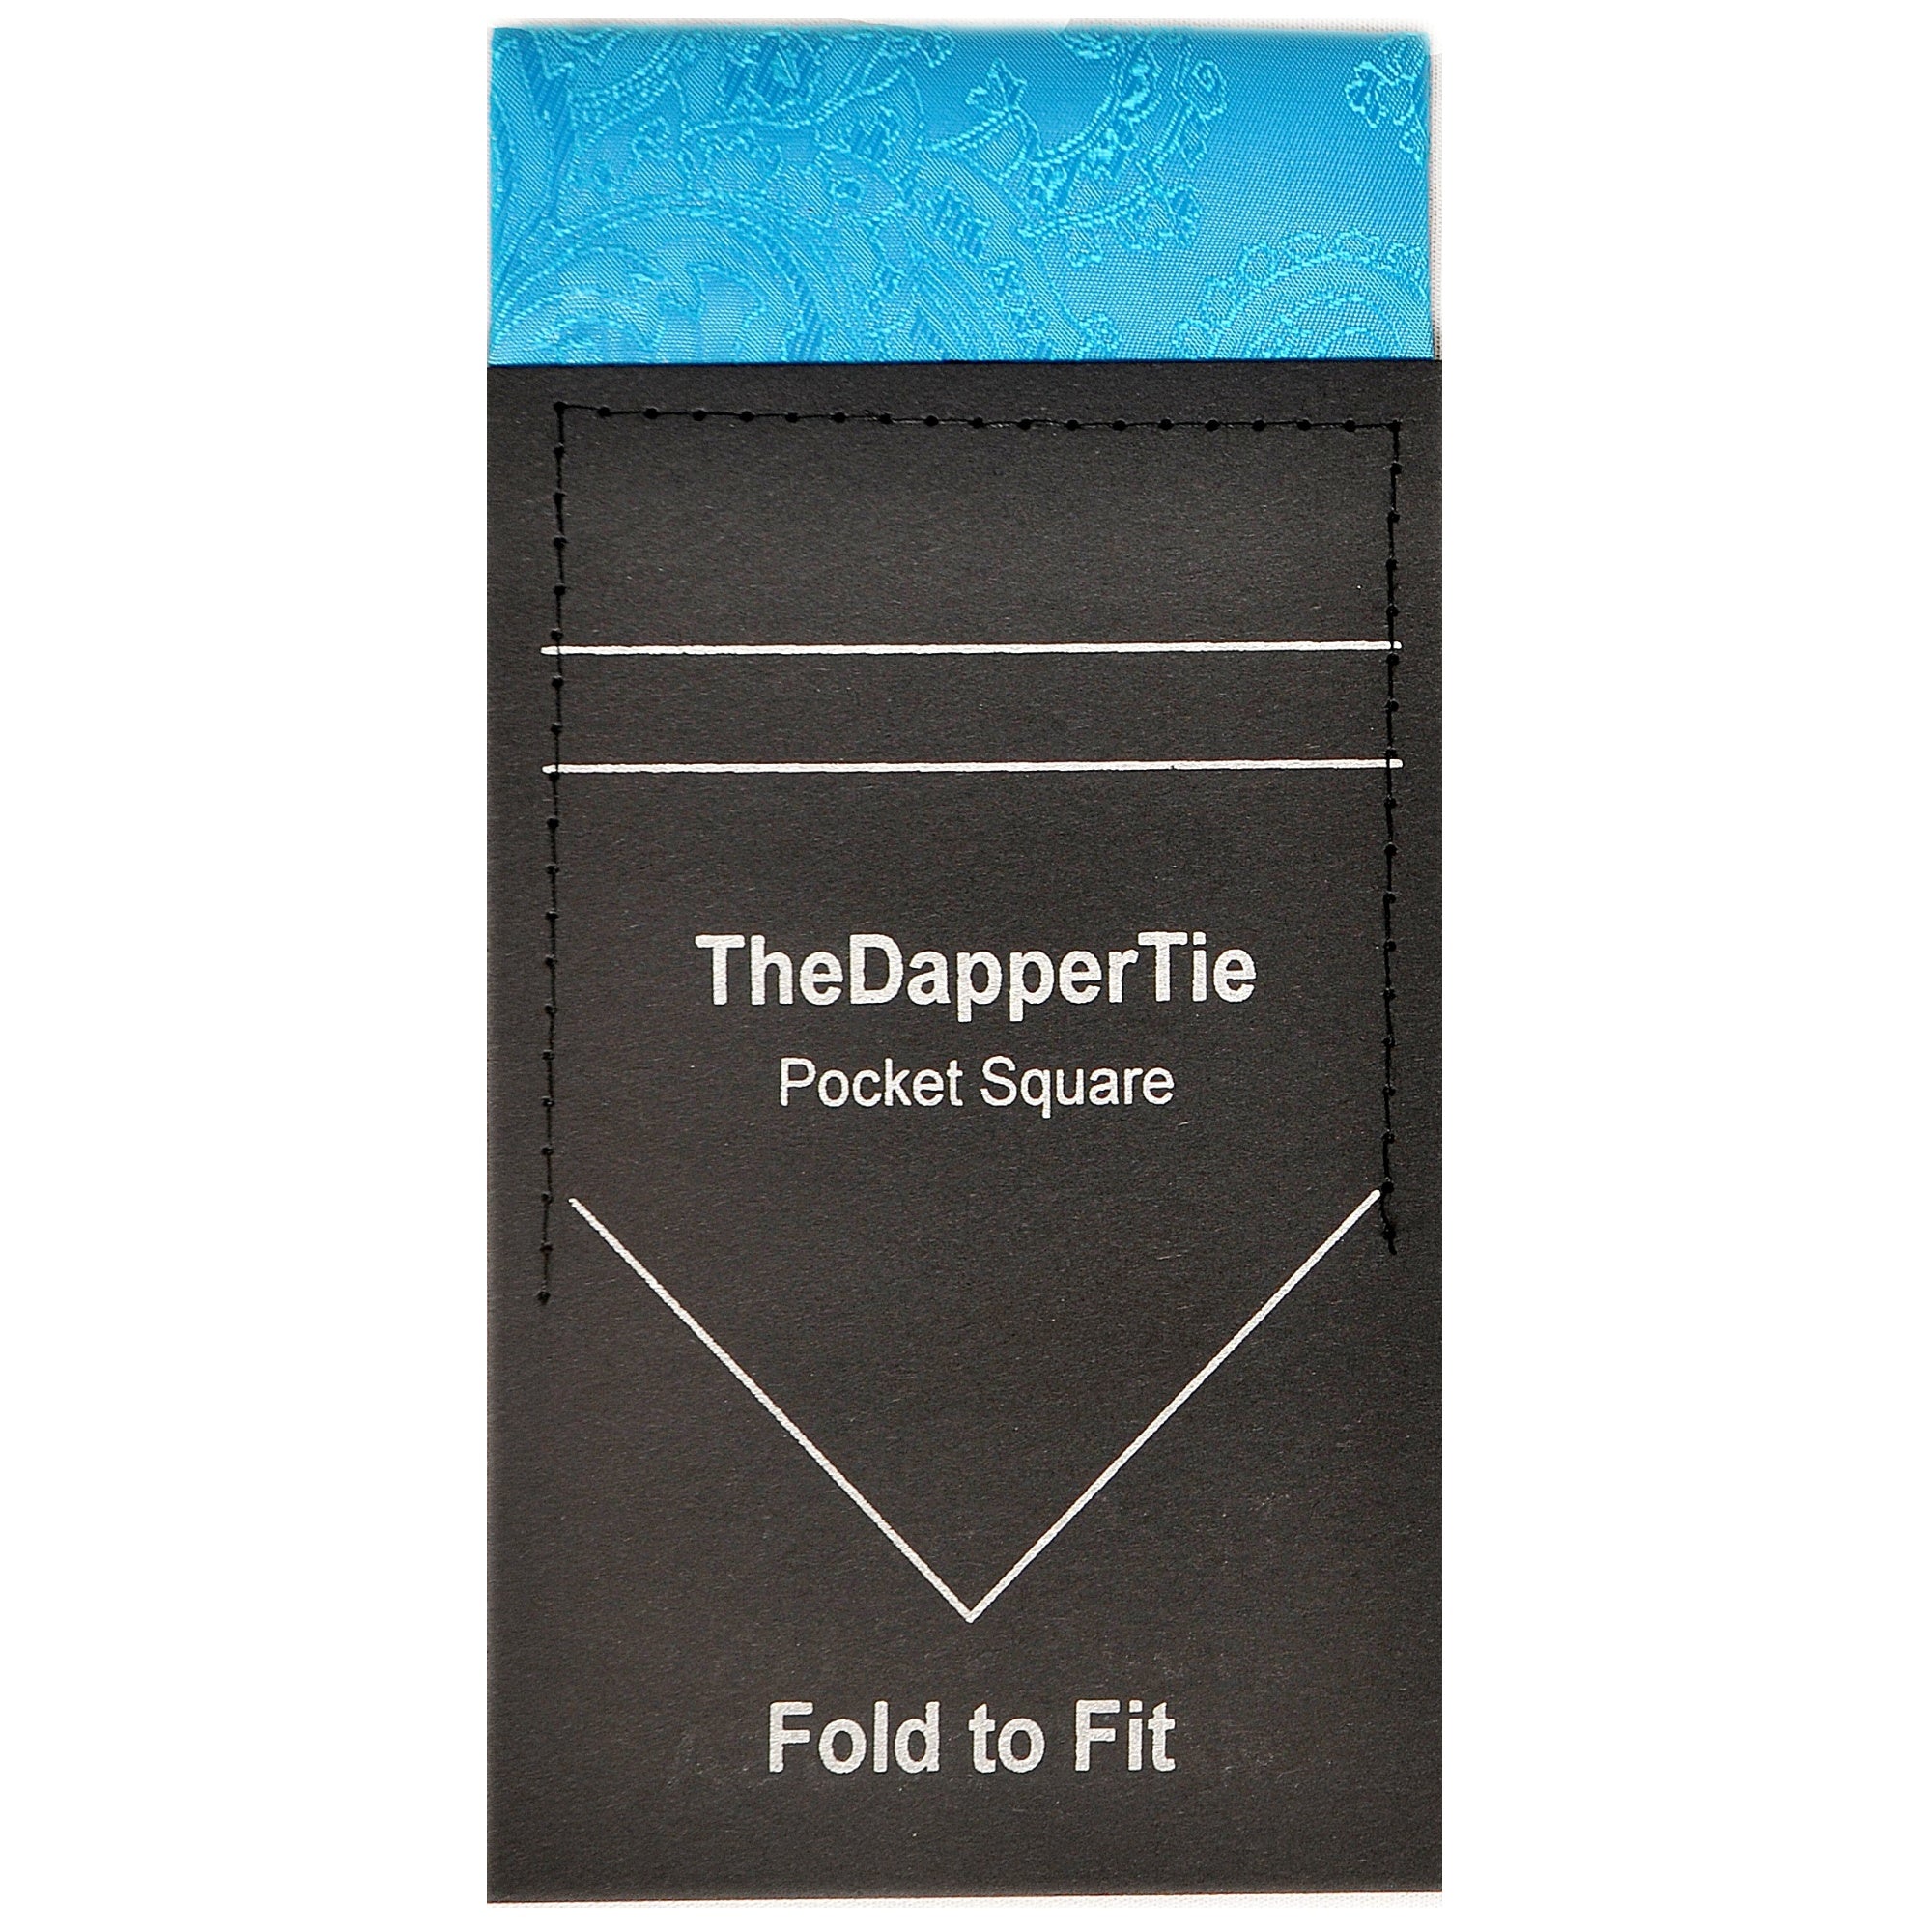 TheDapperTie - New Men's Paisley Flat Pre Folded Pocket Square on Card Prefolded Pocket Squares TheDapperTie Turquoise Regular 